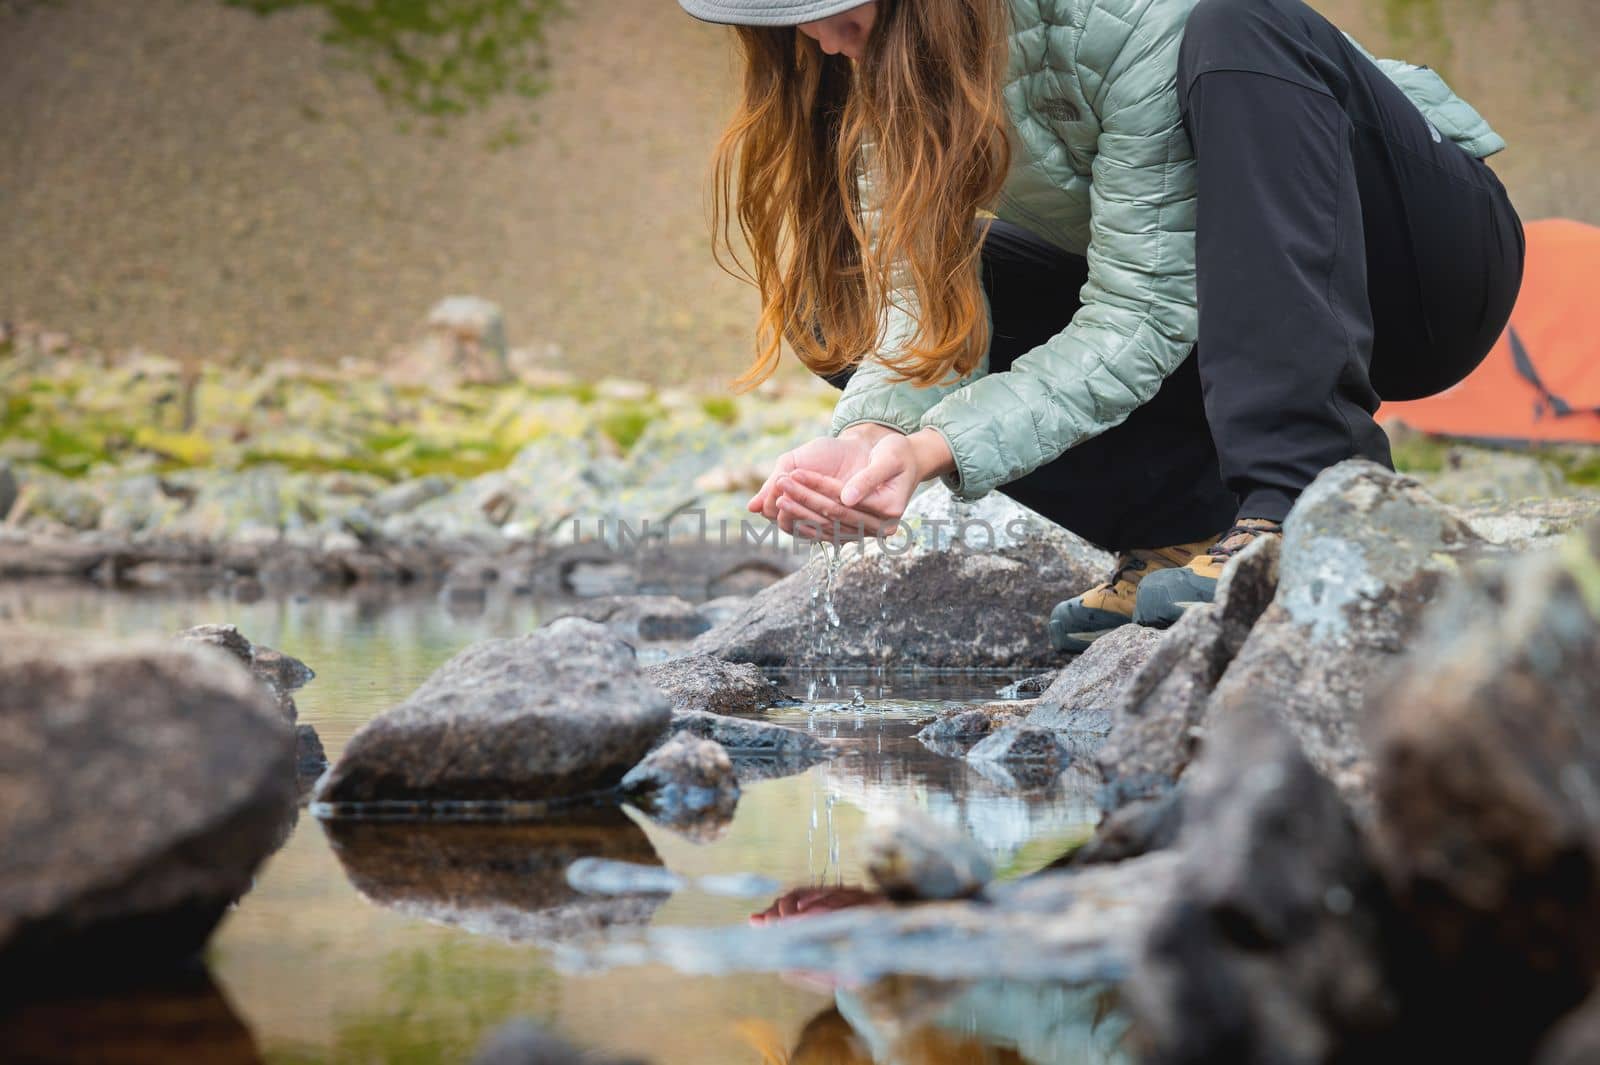 A young girl fills the palms of her hands with water from a stream of a cold mountain lake.